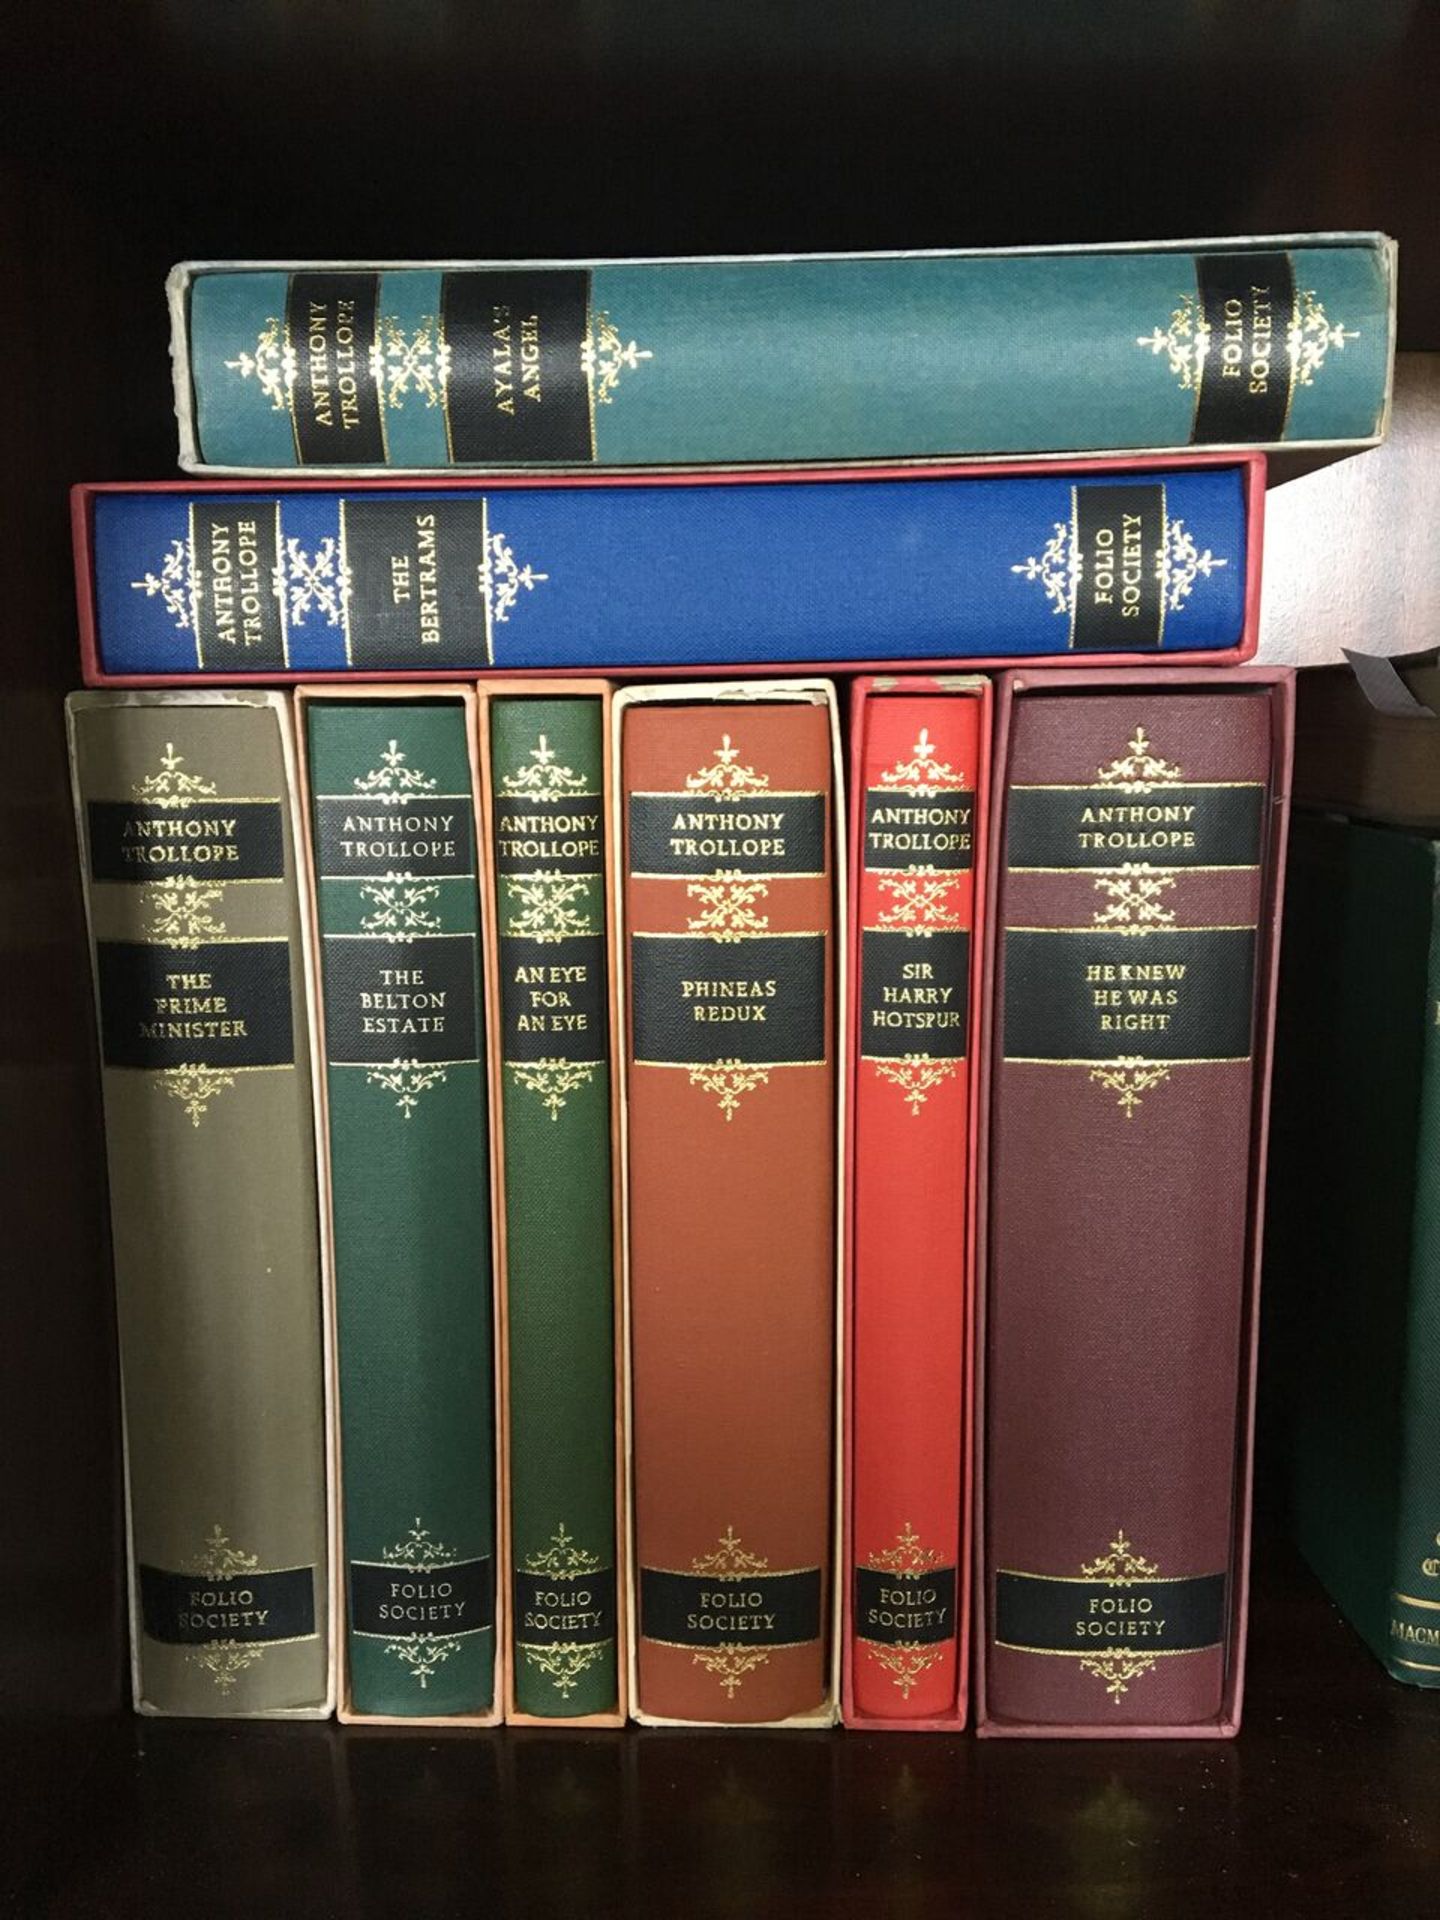 A GOOD COLLECTION OF EIGHT FOLIO SOCIETY BOOKS, ALL NOVELS BY ANTHONY TROLLOPE. CLASSIC FOLIO